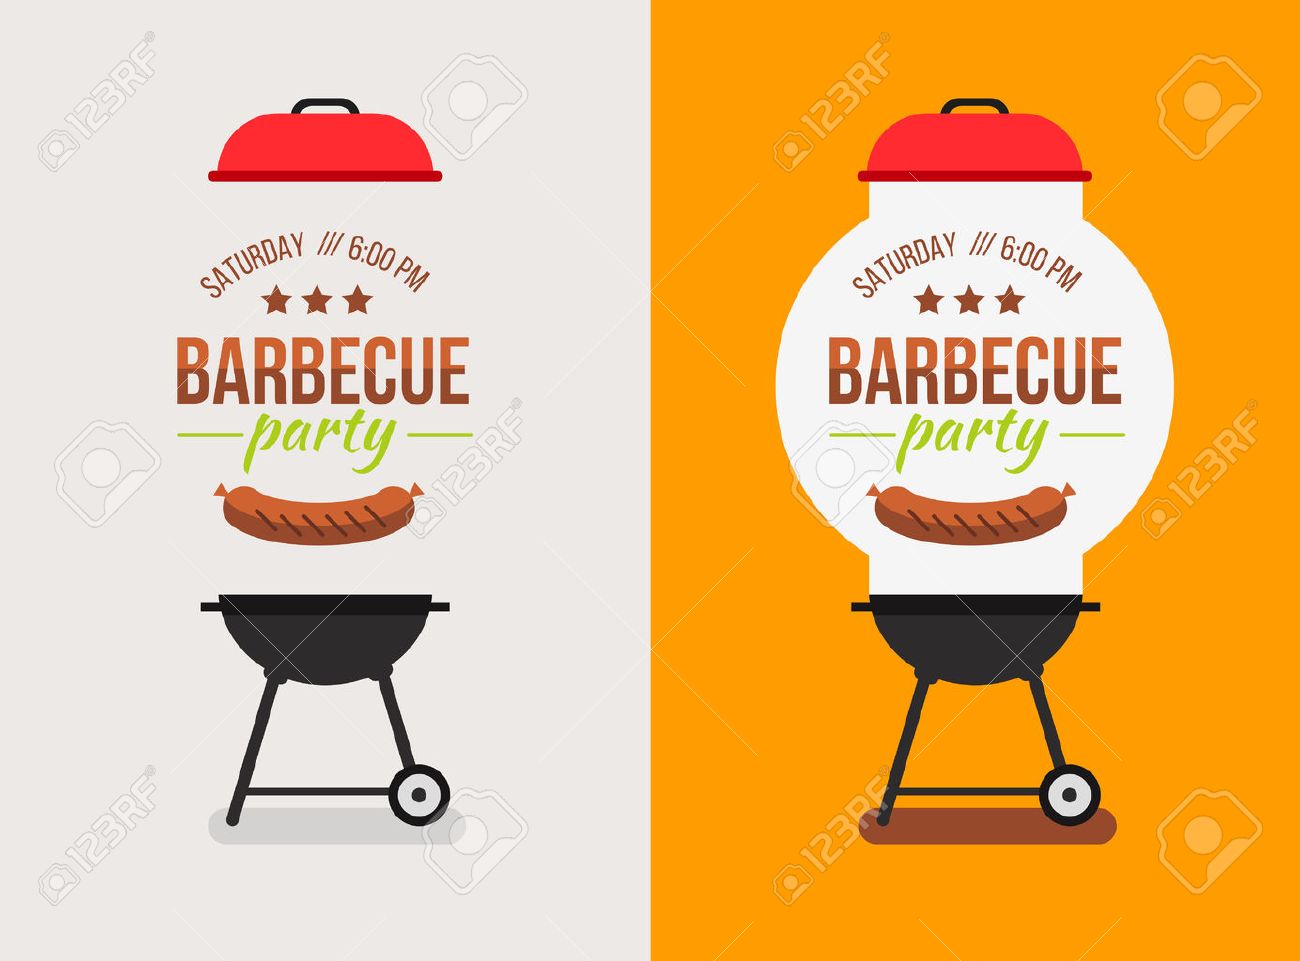 Barbecue party clipart 4 » Clipart Station.